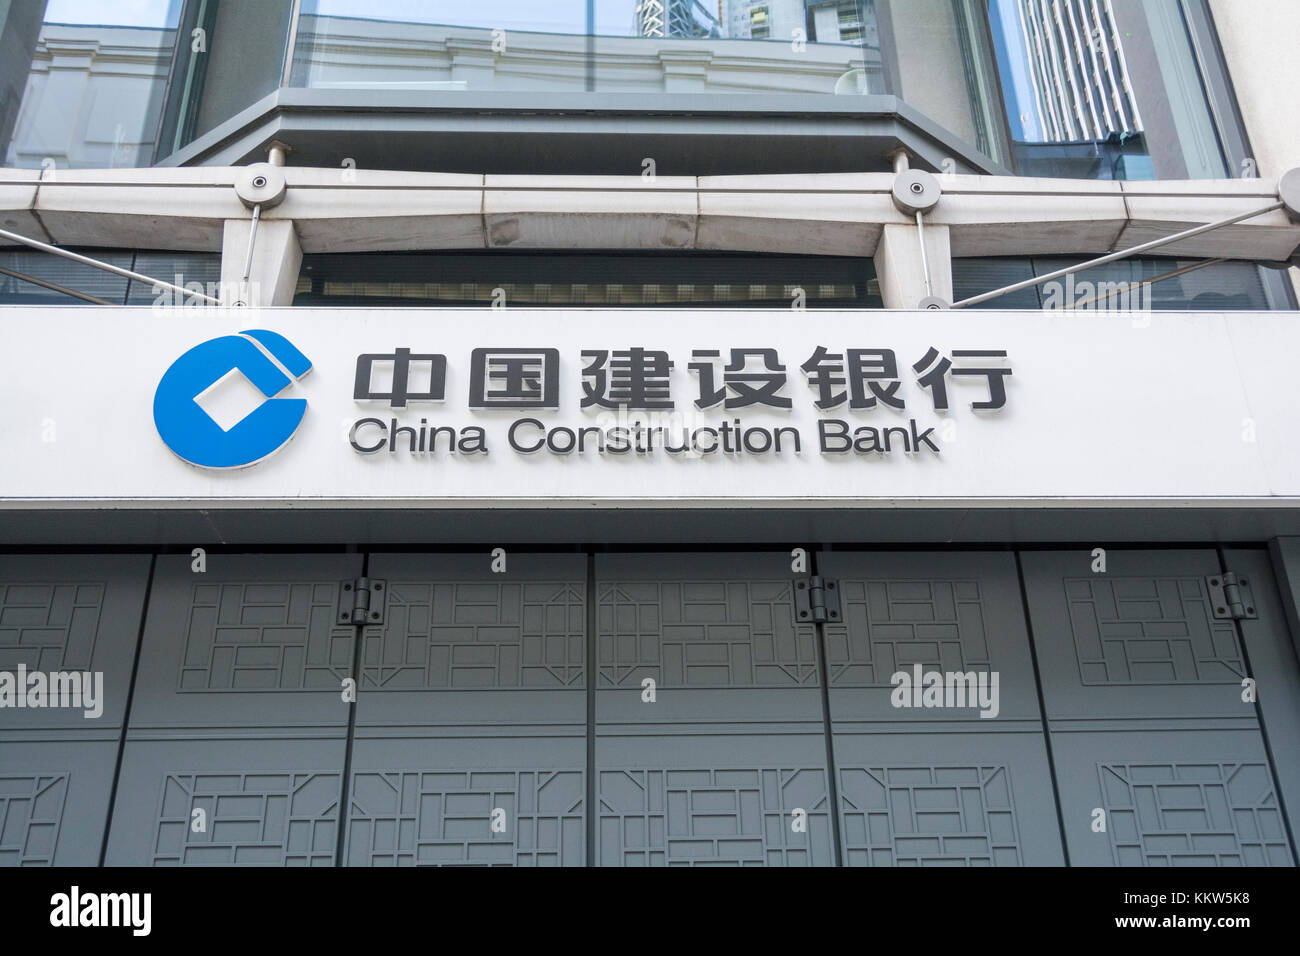 China Construction Bank (CCB) one of the big four banks in the People's Republic of China. Stock Photo